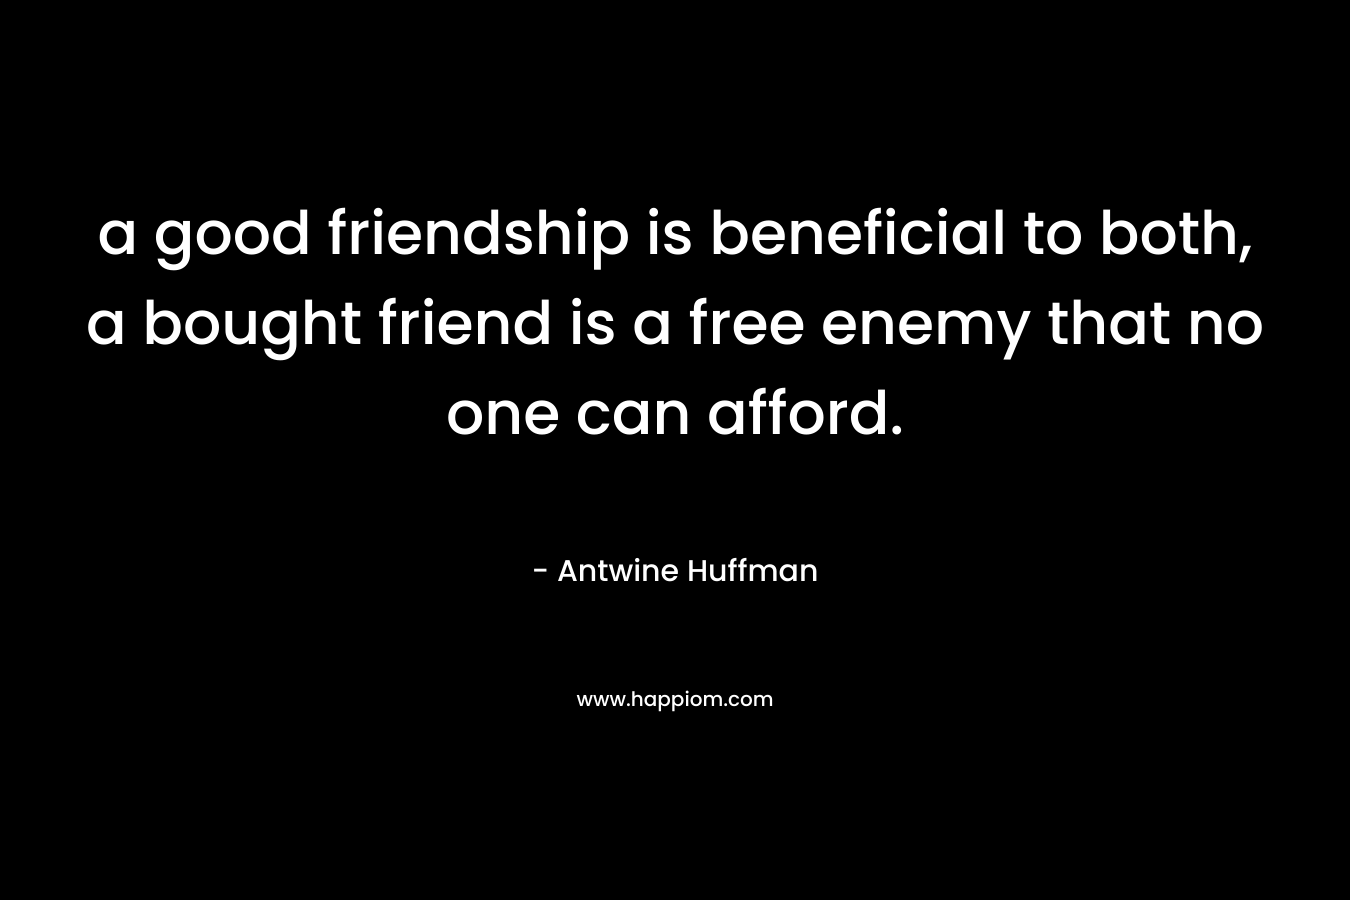 a good friendship is beneficial to both, a bought friend is a free enemy that no one can afford.